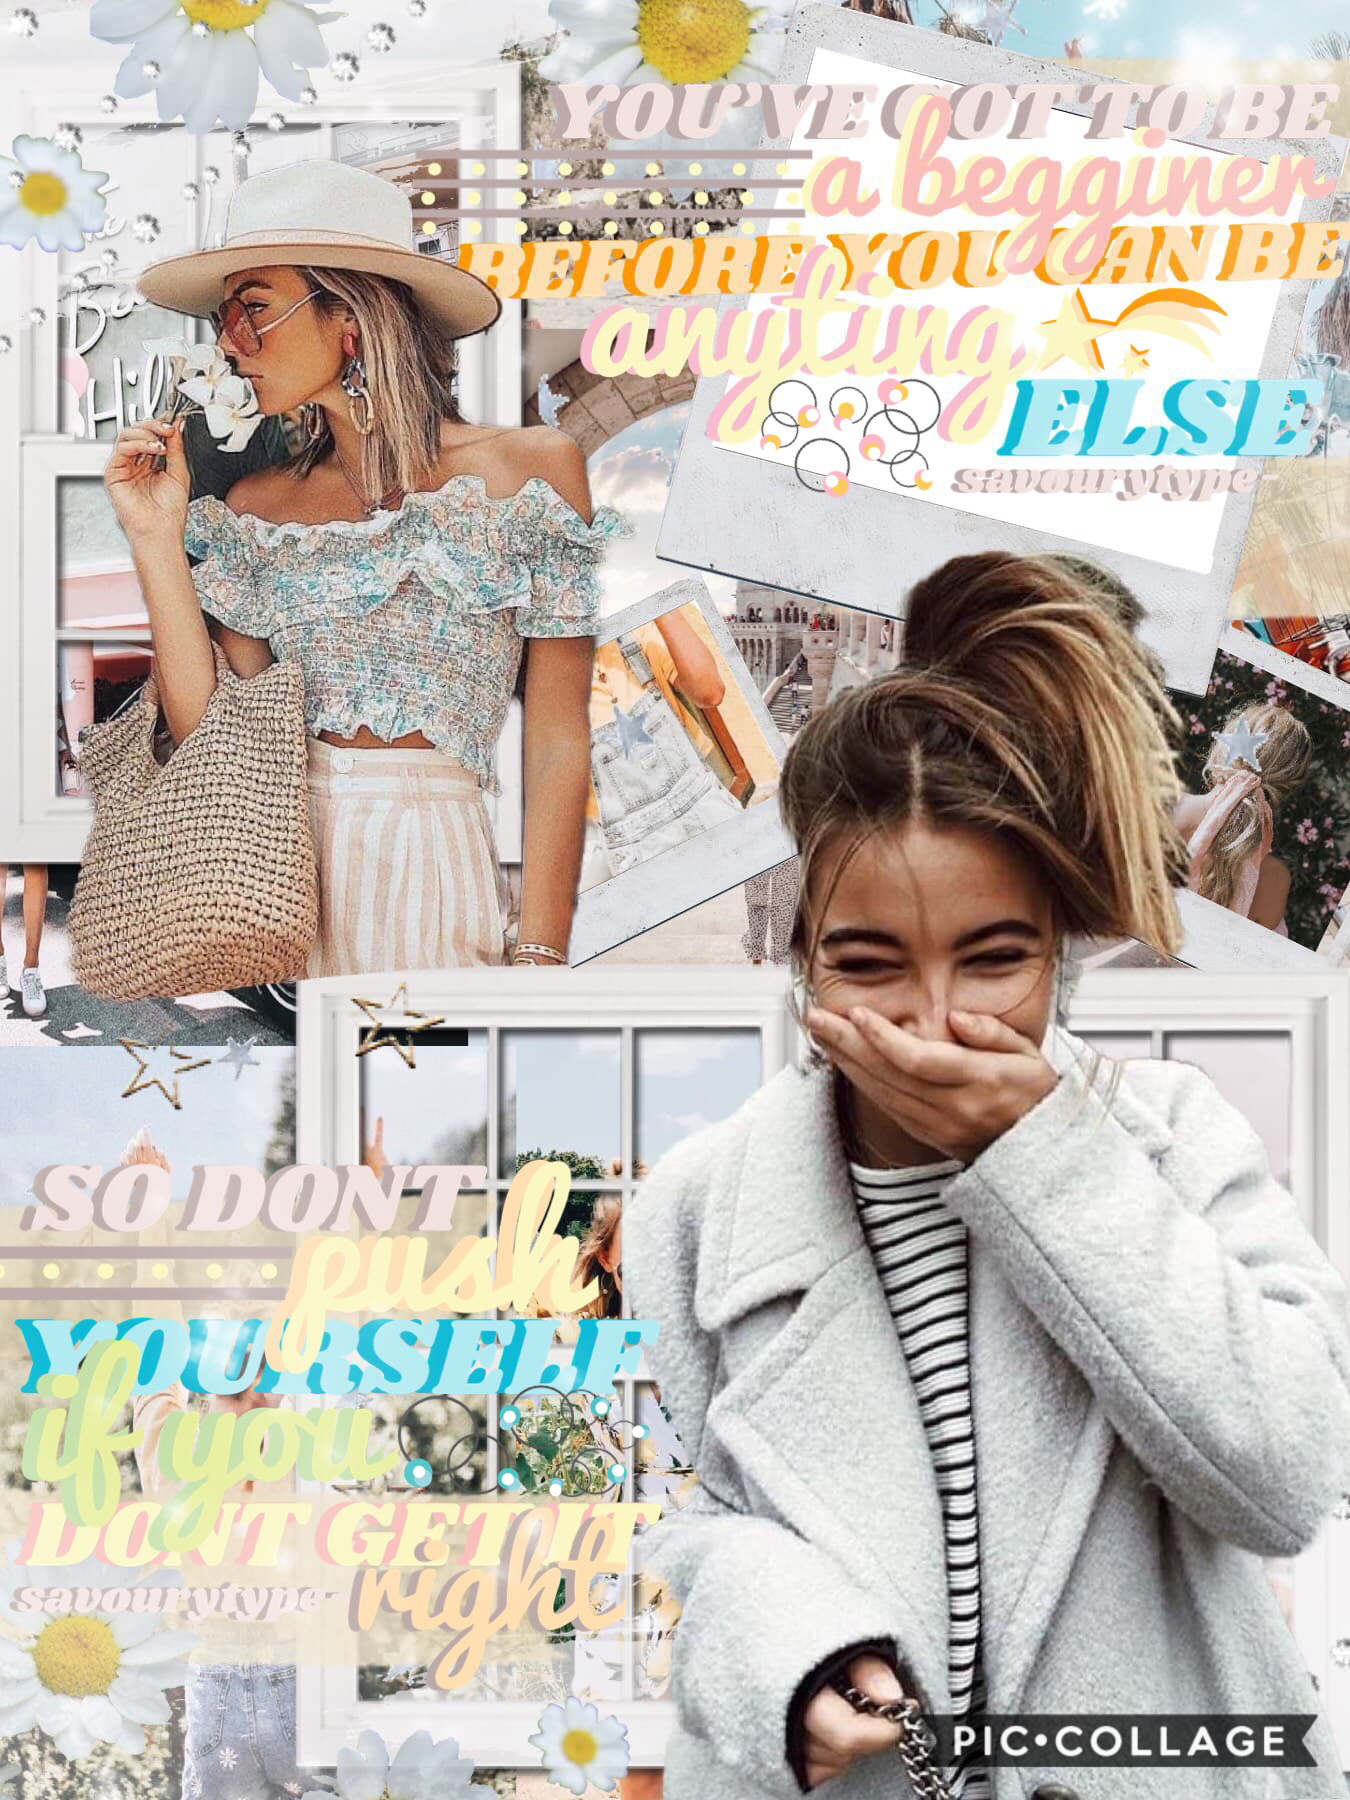 hey! My names Amberleigh! I hope you all like this, it is inspired by @meandmeonly, @blossomed_ and more users with this style💘